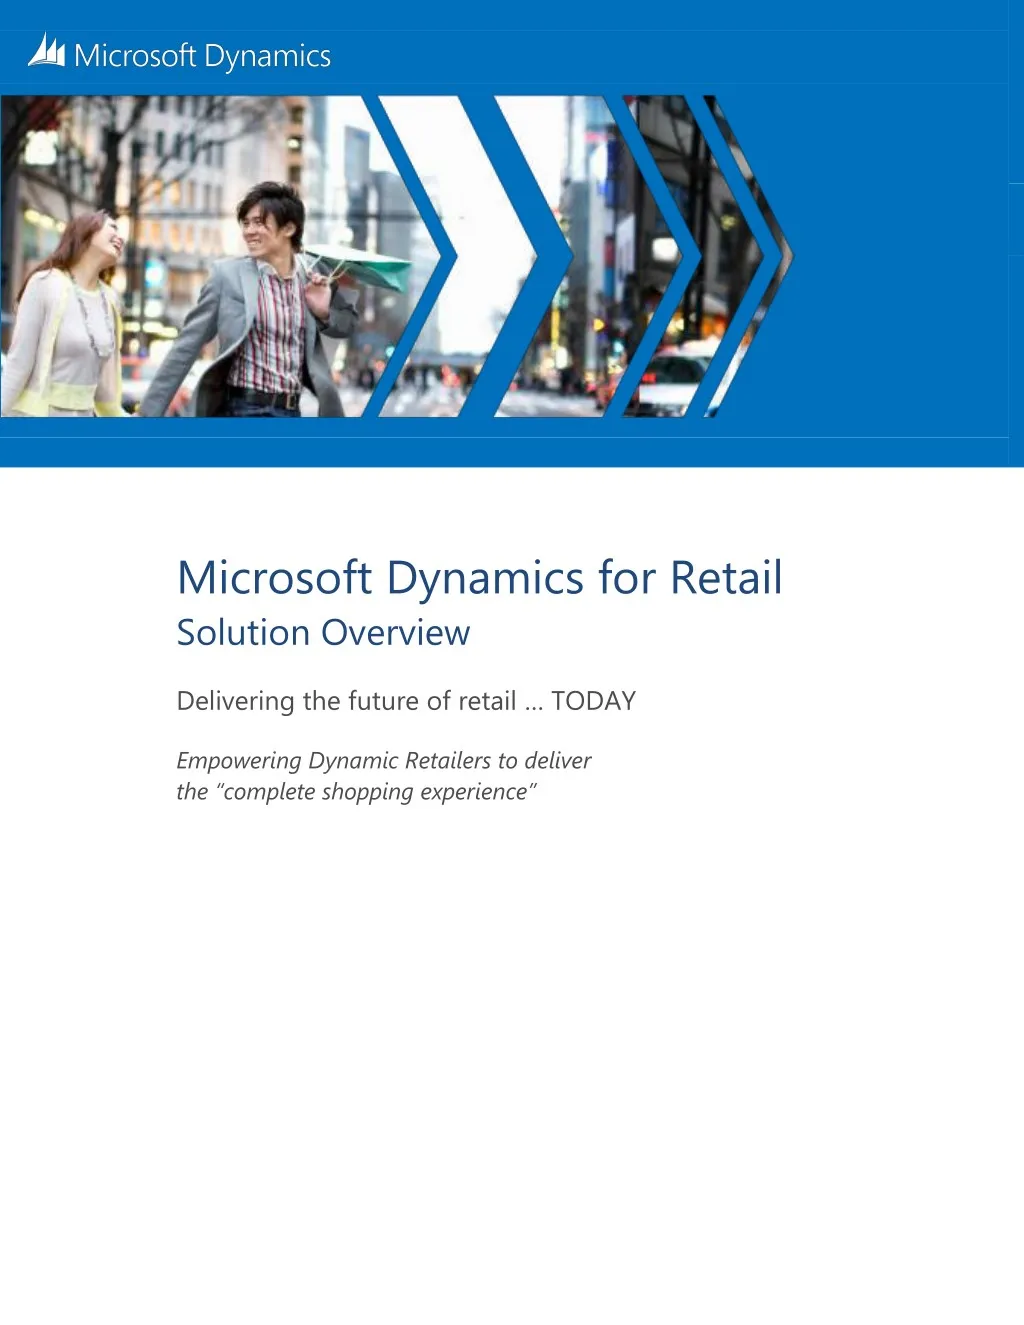 microsoft dynamics for retail solution overview